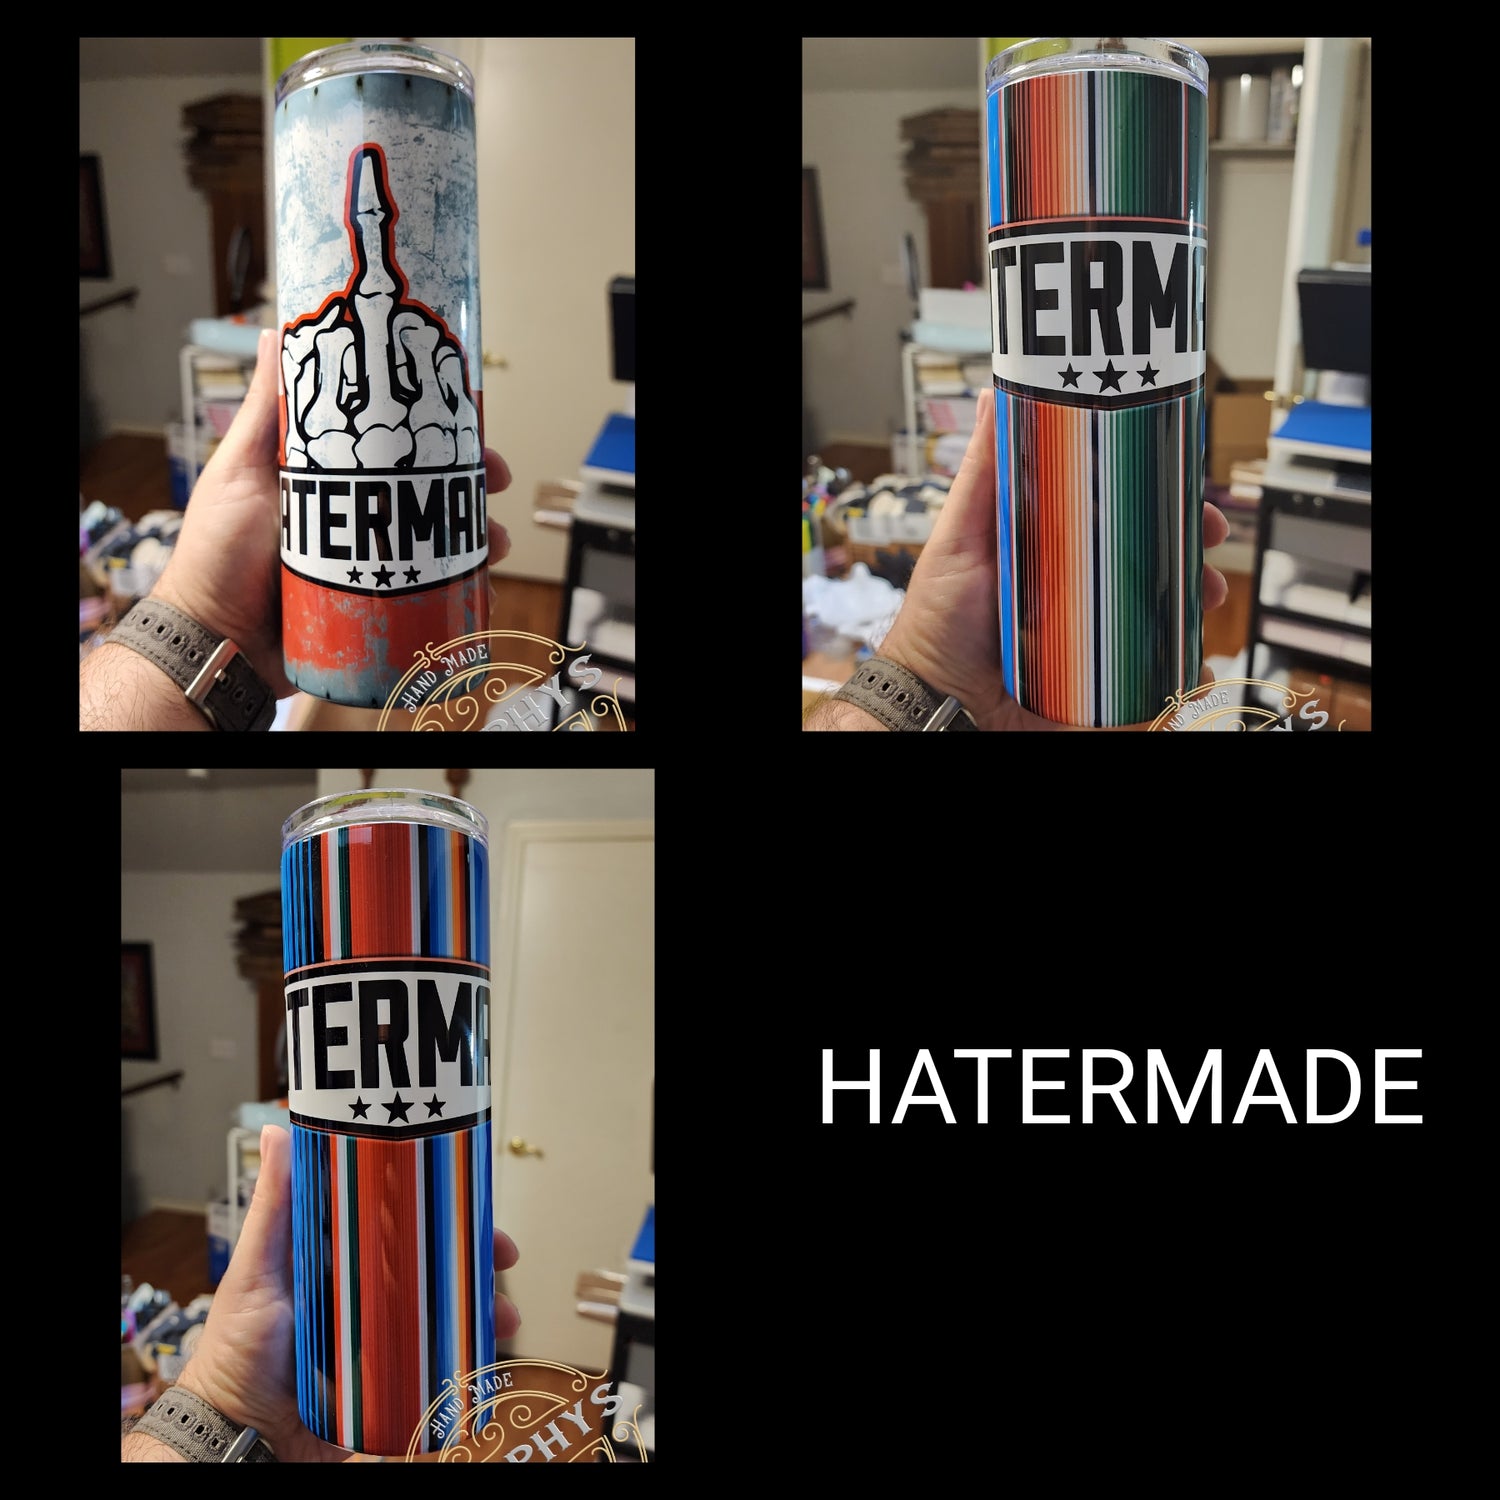 HATERMADE